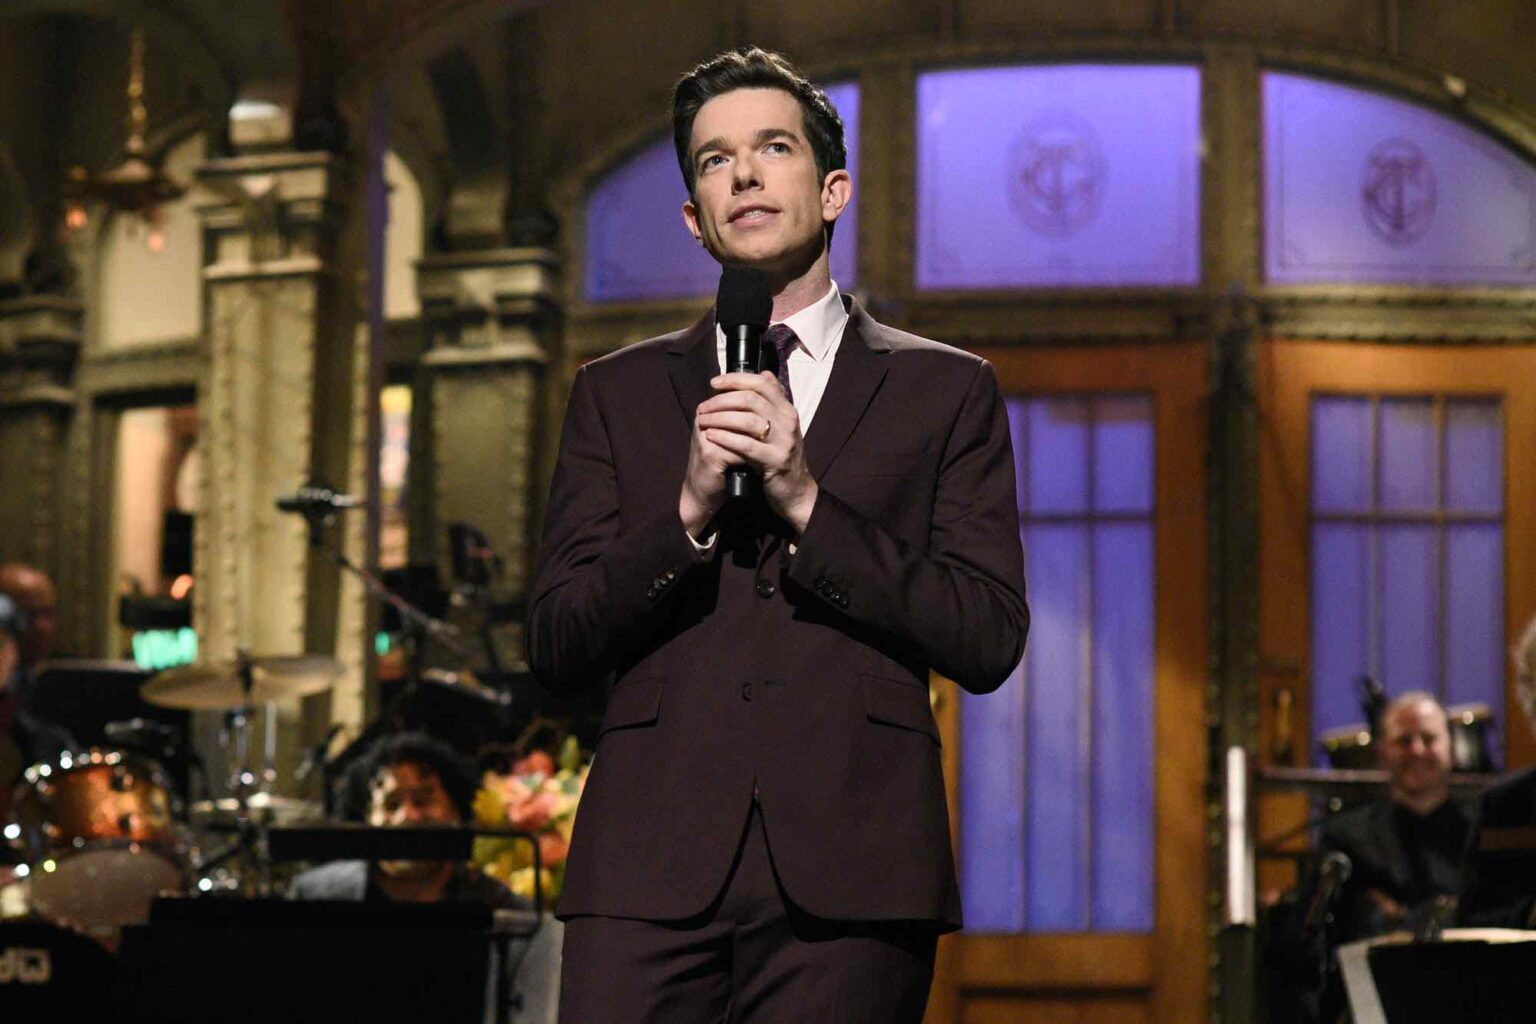 John Mulaney has said lots of wild things. Discover the quotes that led to him being investigated by the Secret Service.